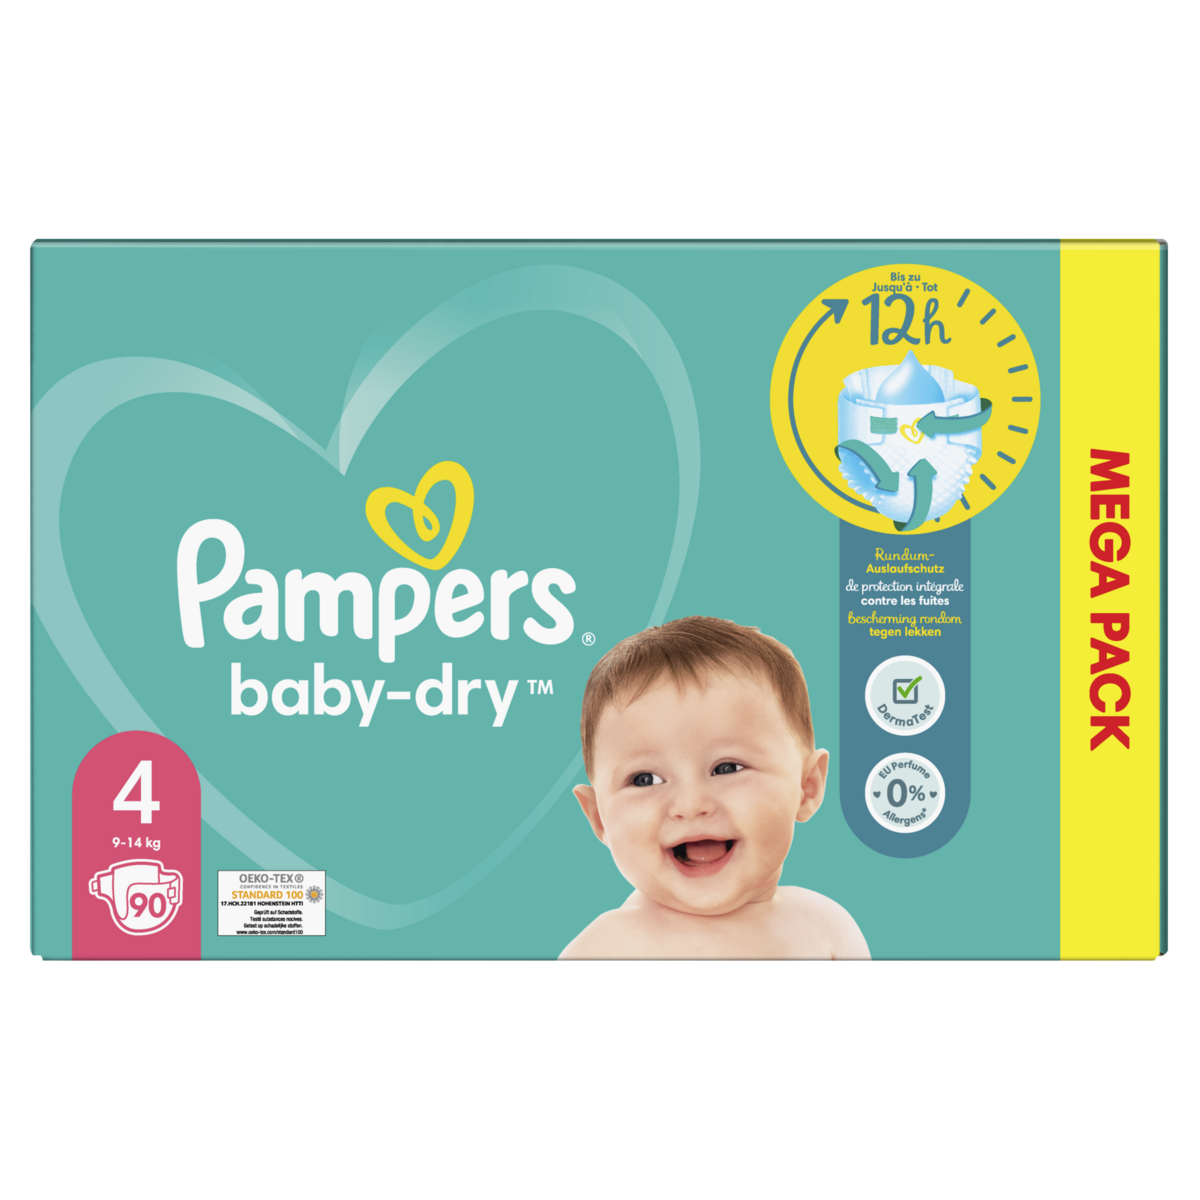 CHANGES BABY DRY PAMPERS